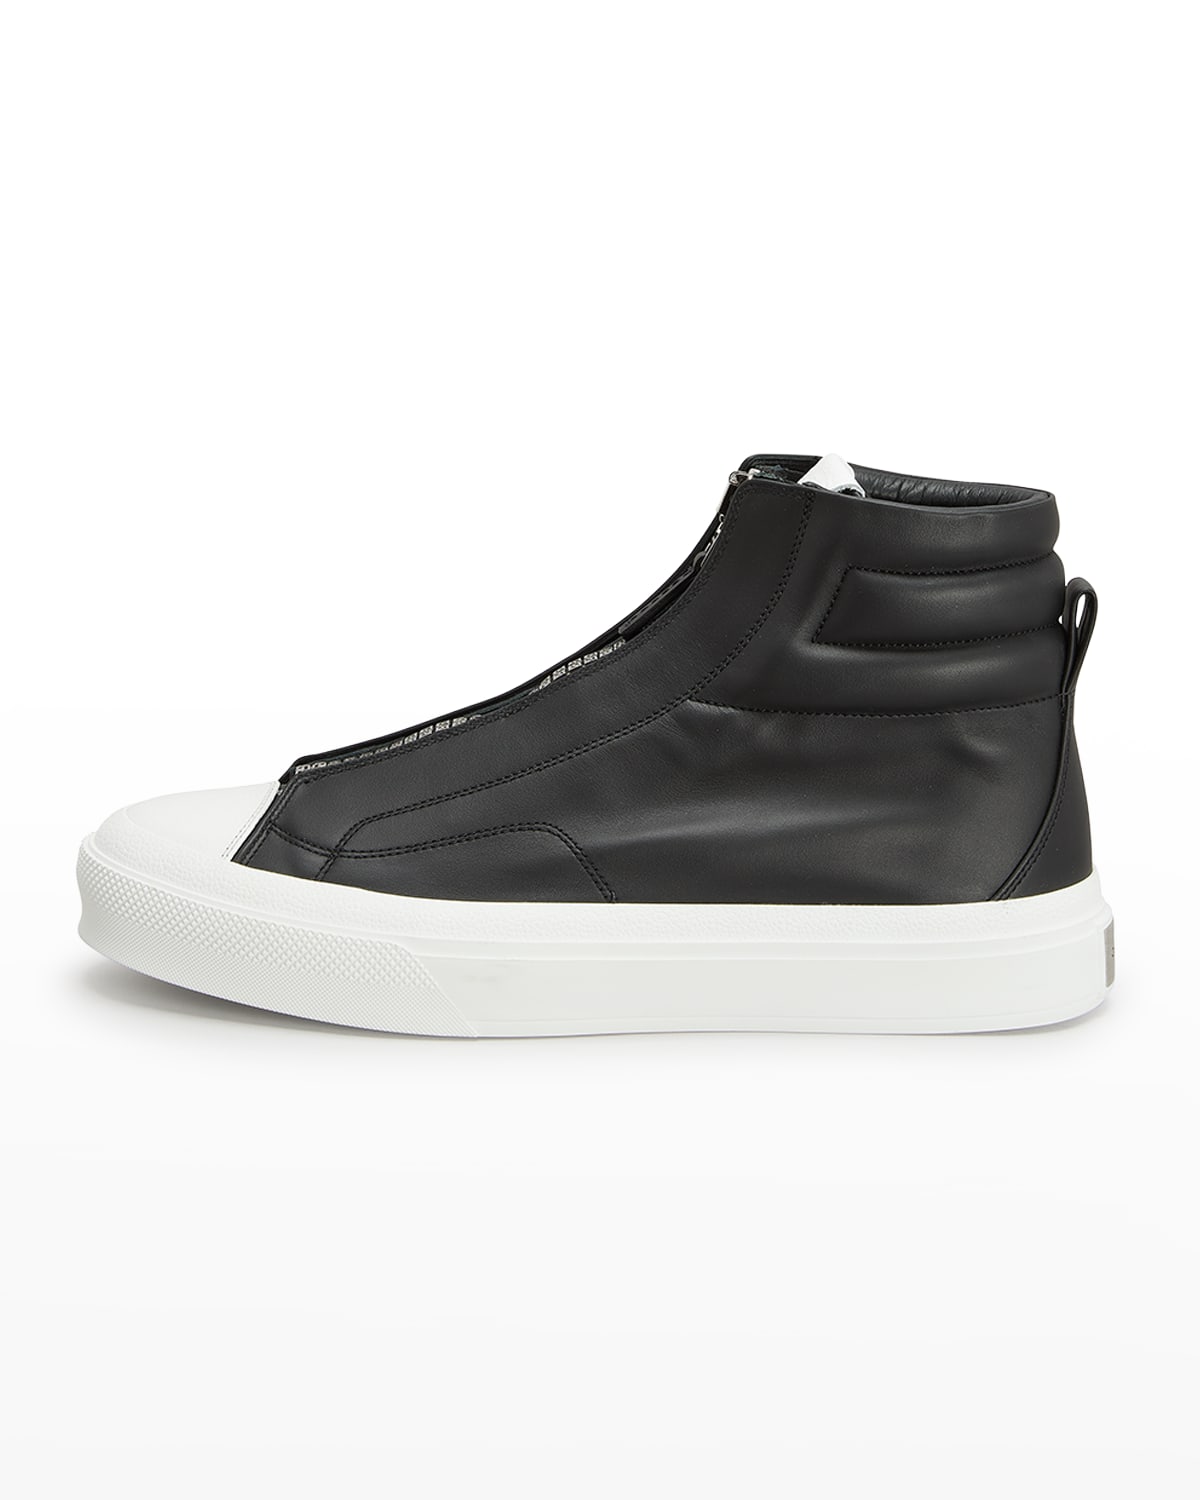 Givenchy Men's City 4G-Zip Leather High Top Sneakers | Smart Closet